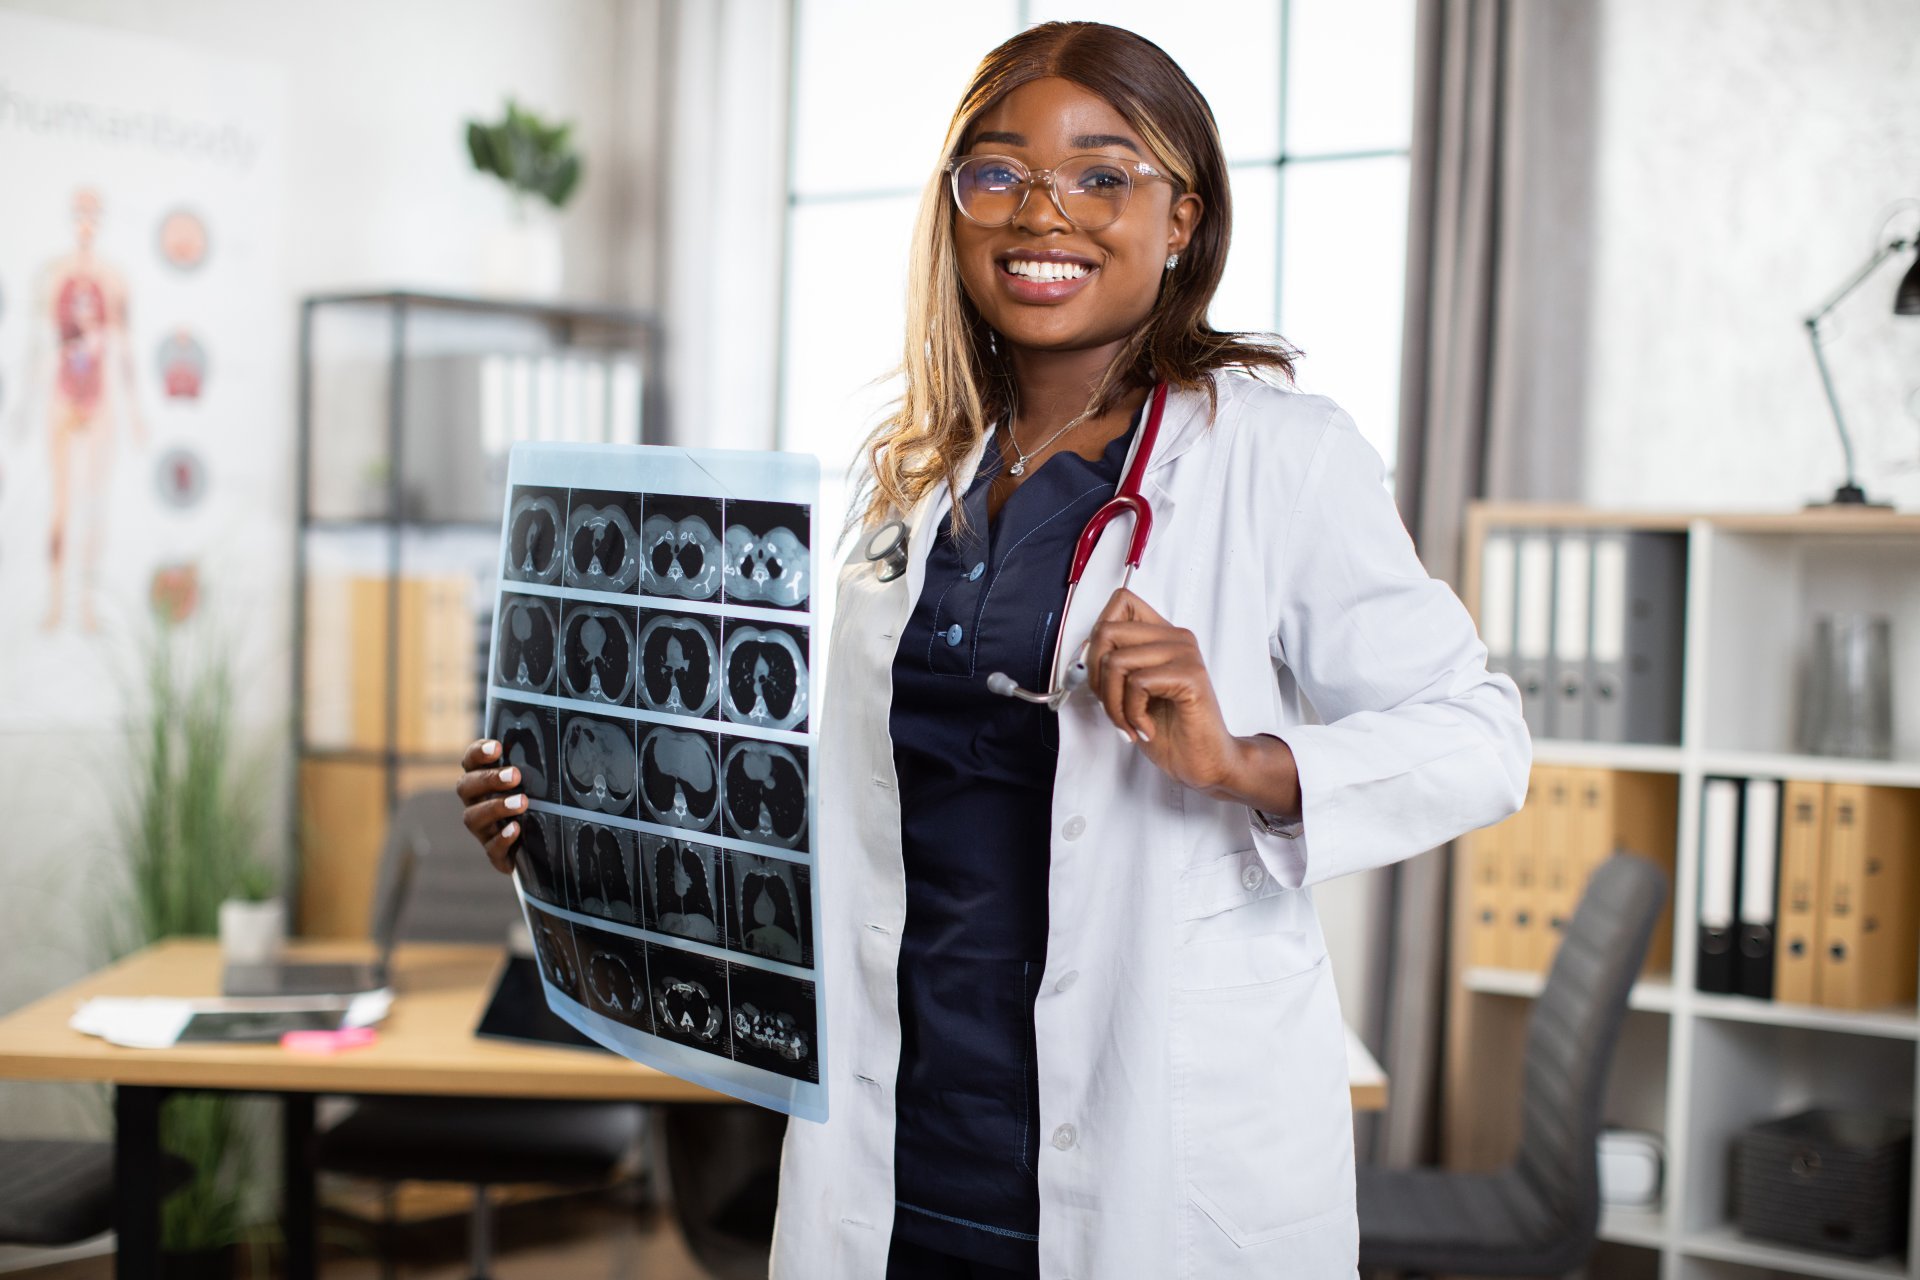 A young female healthcare professional poses while holding a patient's CT scan results.